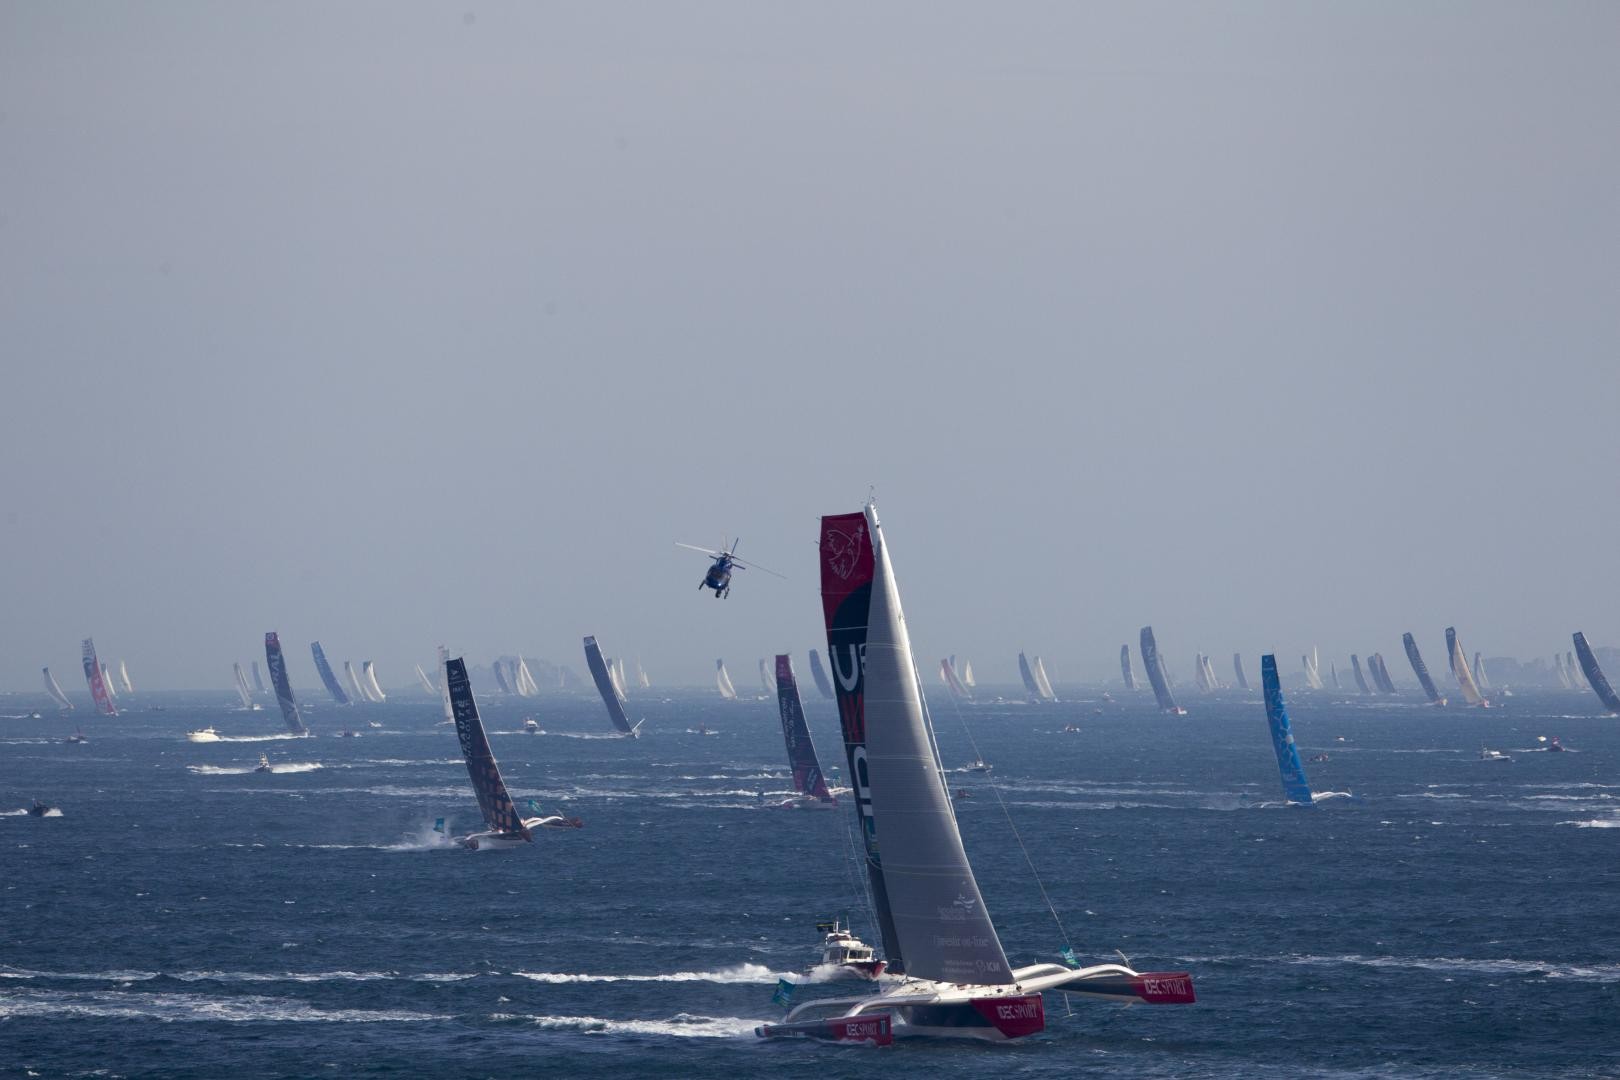 Spectacular scenes off Saint Malo as the 2018 Route du Rhum-Destination Guadeloupe gets underway in perfect conditions